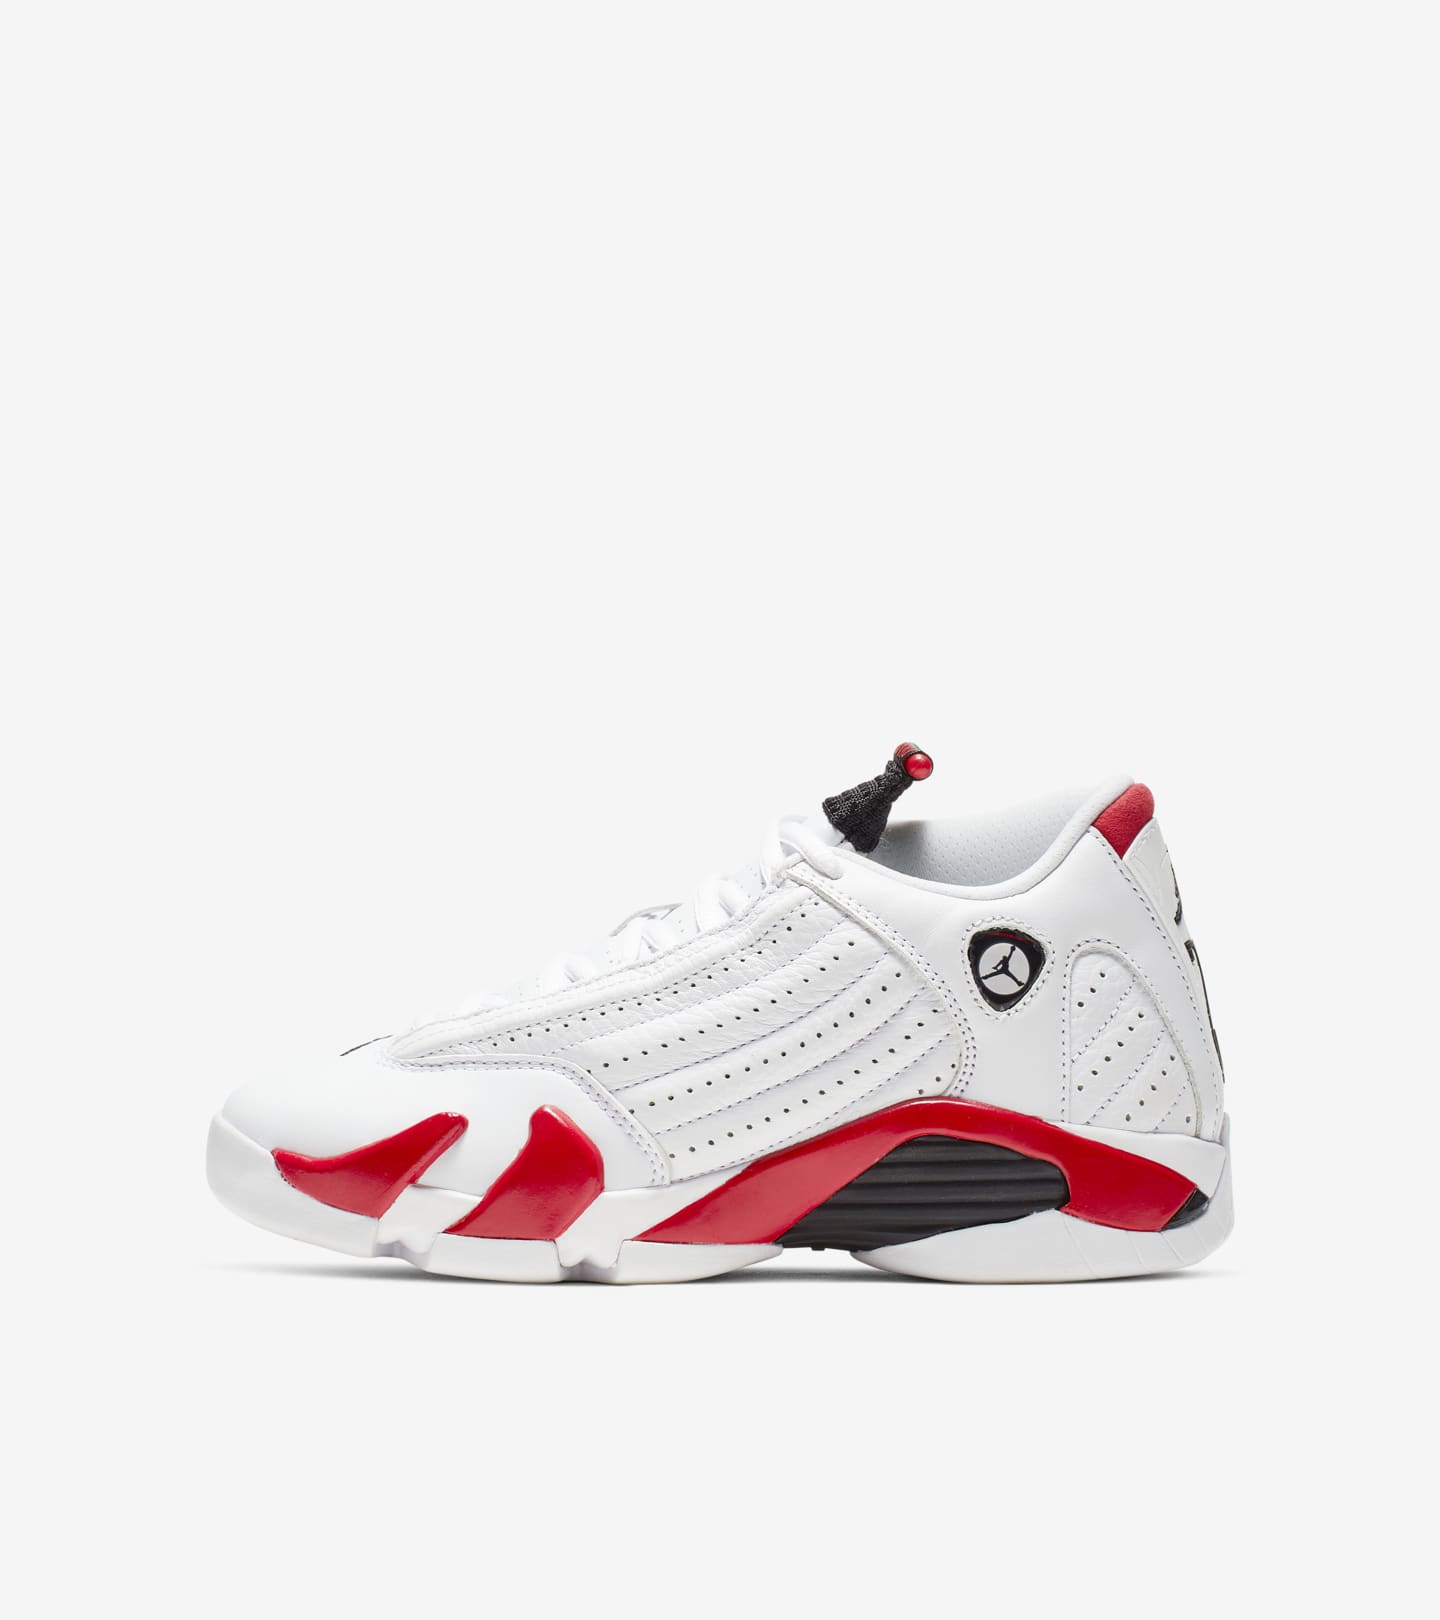 white red 14s release date